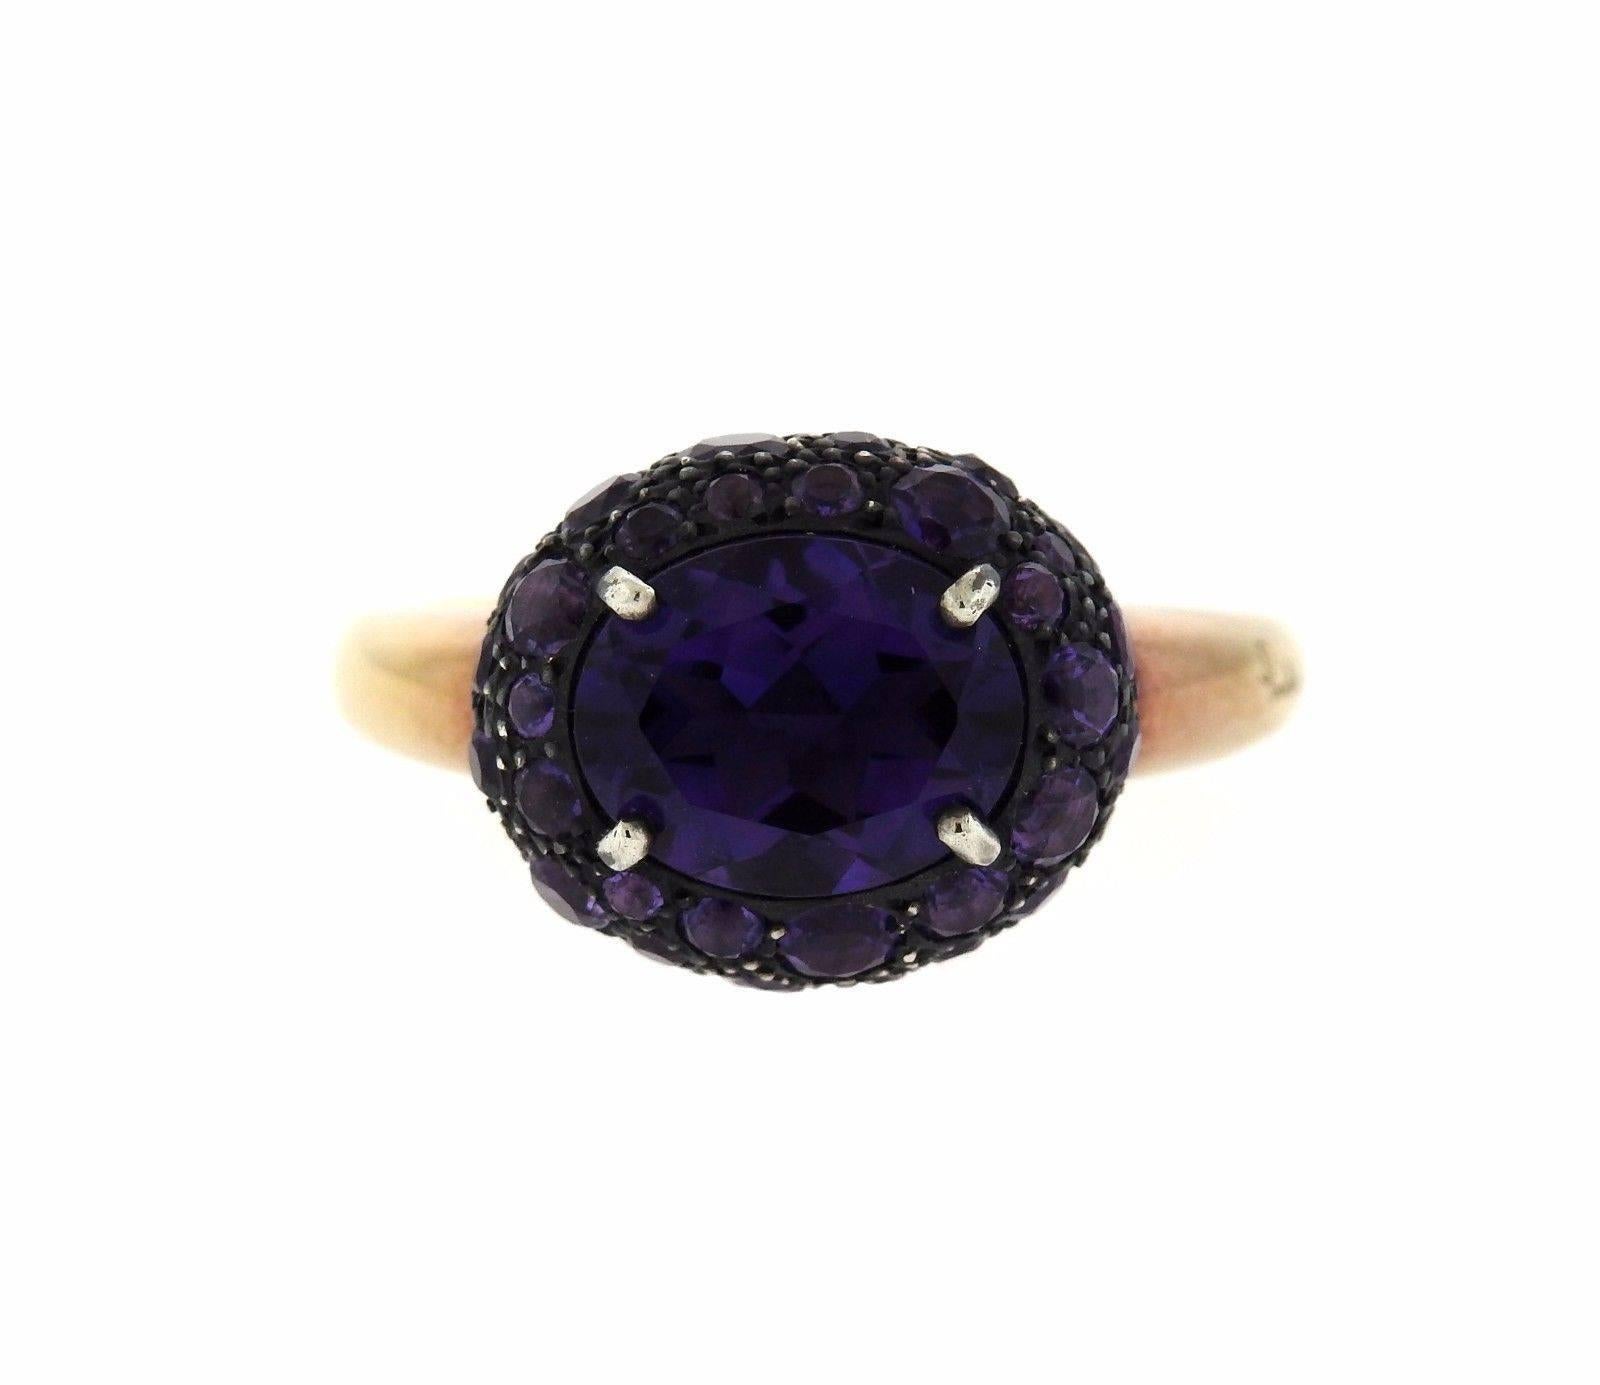 An 18k rose gold and burnished silver ring set with Amethyst.  The ring is a size 6 1/2 and the top is 12.5mm x 15mm.  The weight of the piece is 9.9 grams. Marked: Pomellato, 750.